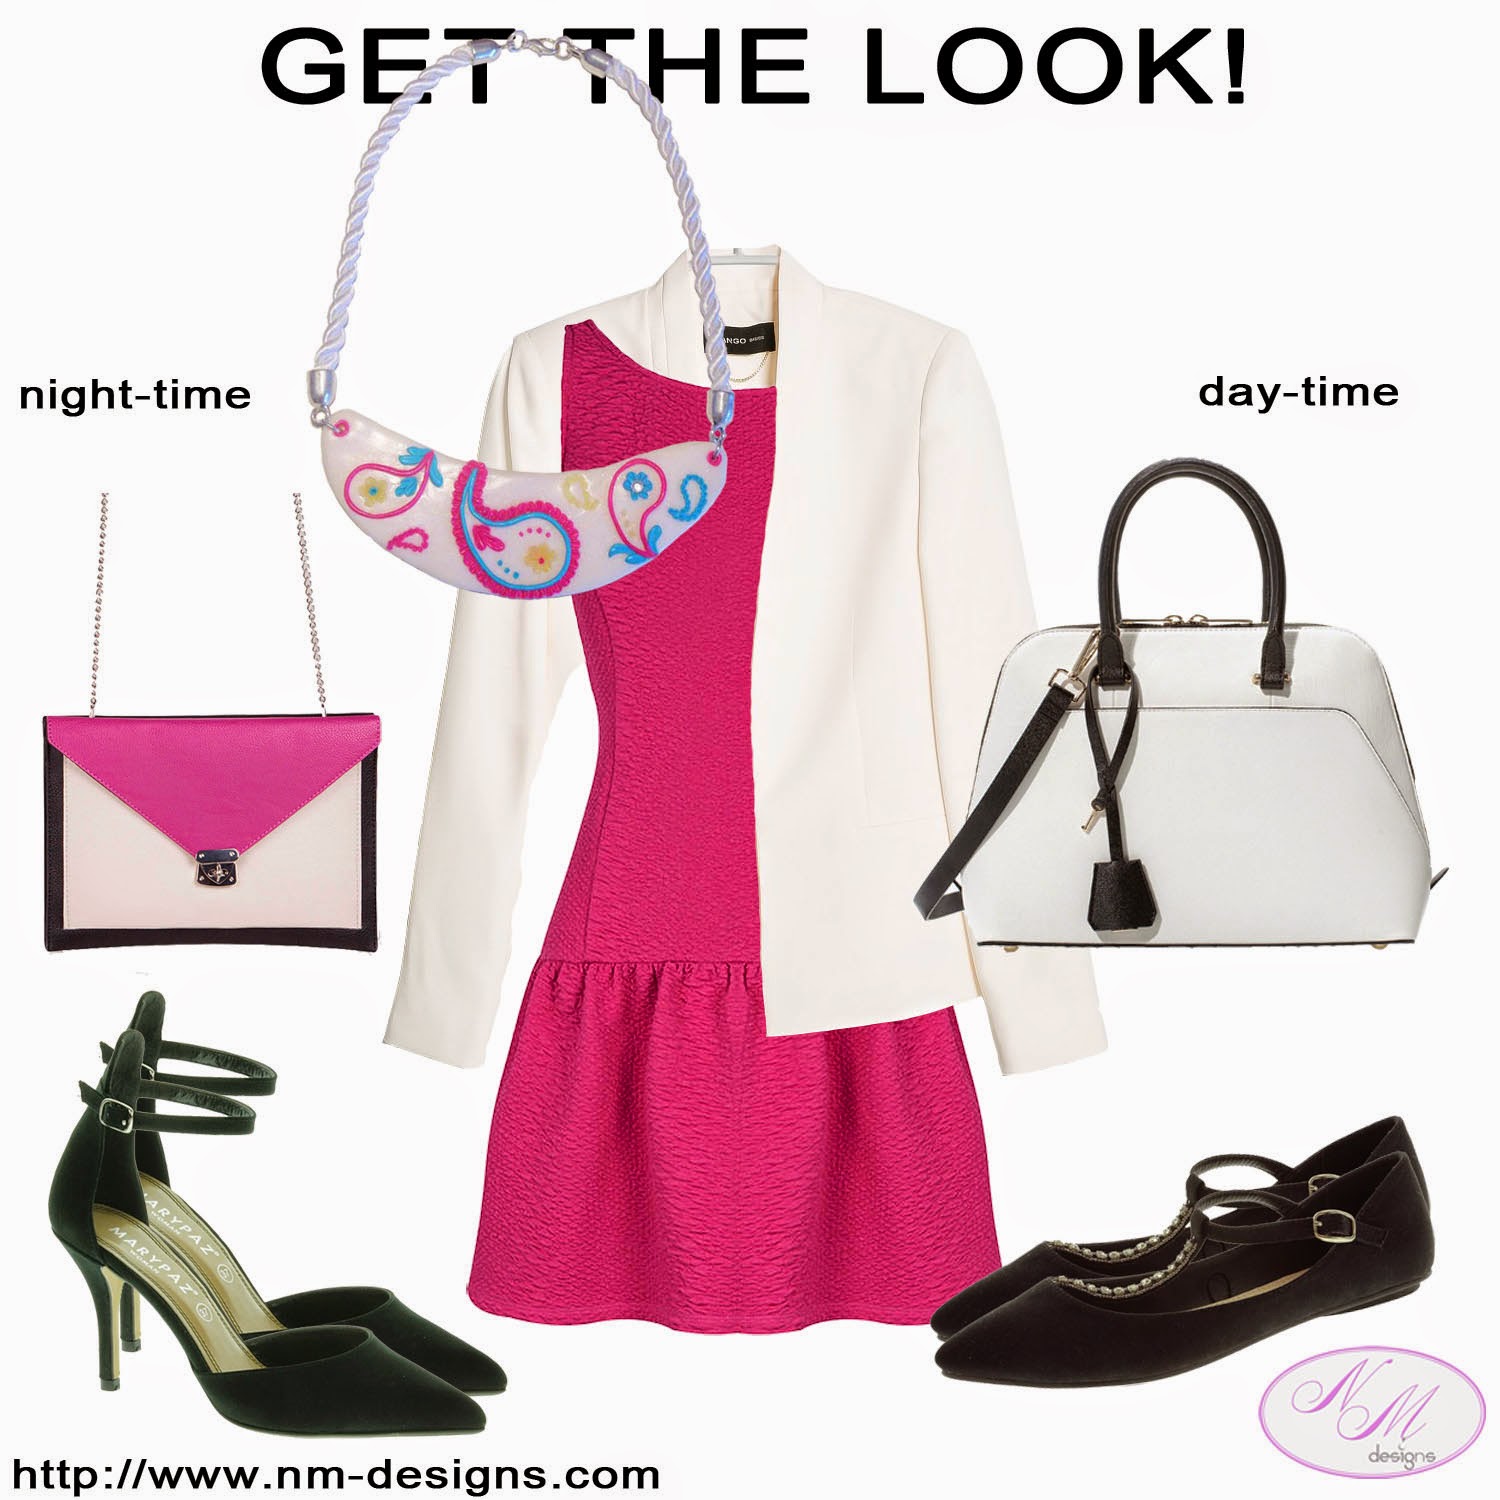 "GET THE LOOK" from September 10, 2014